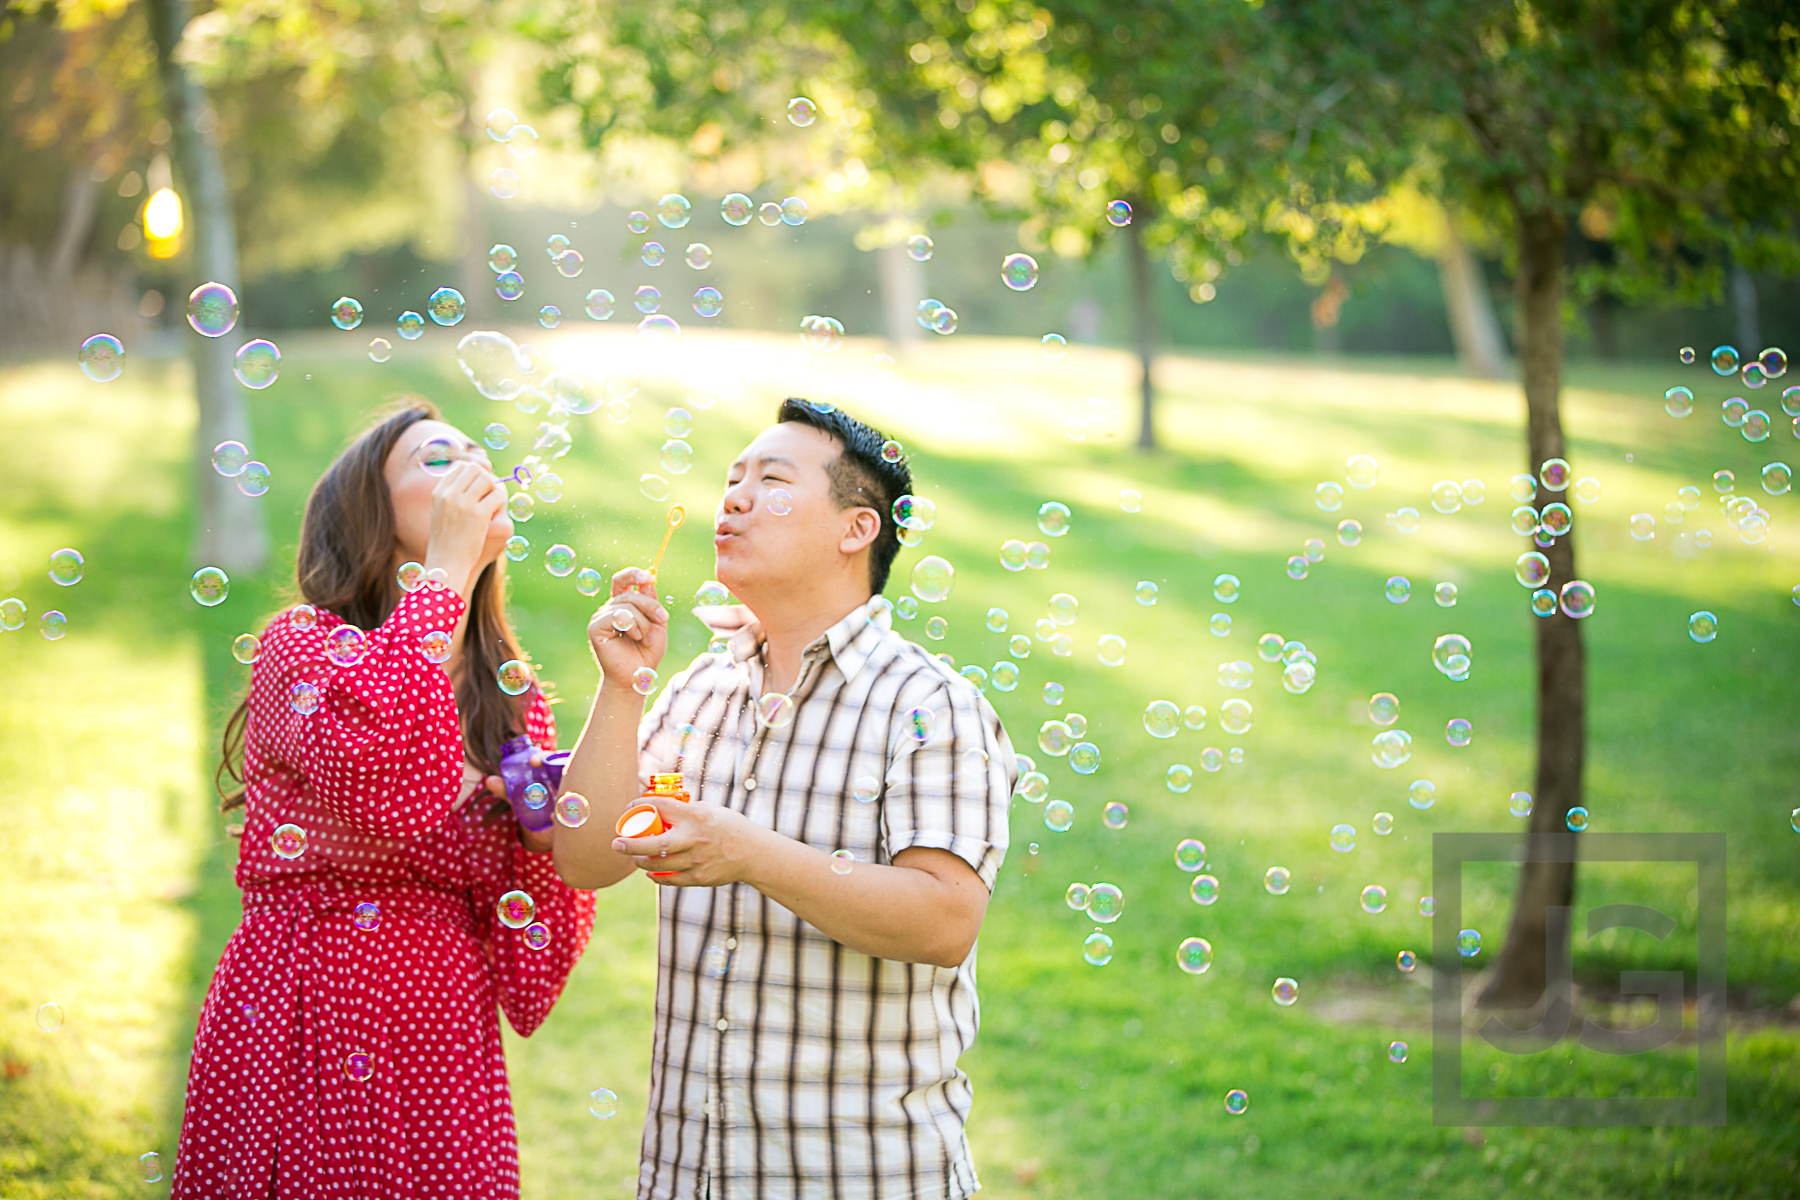 Engagement Photography with Bubbles